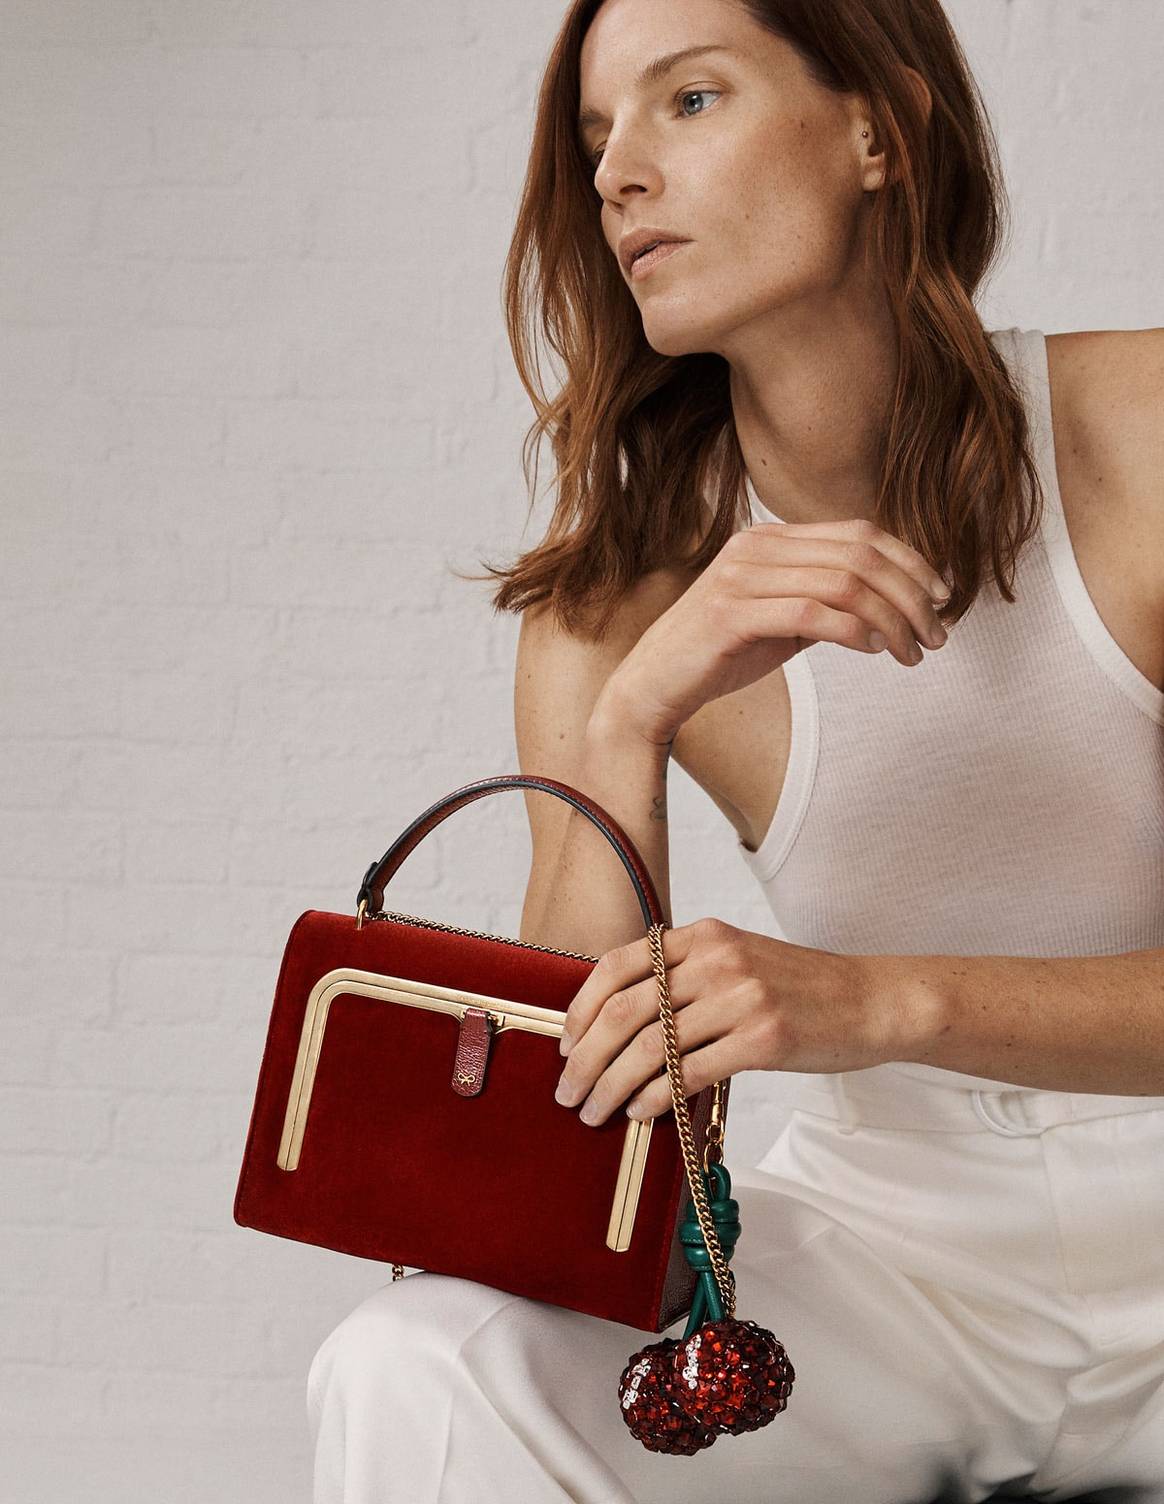 Anya Hindmarch continues consumer focused LFW